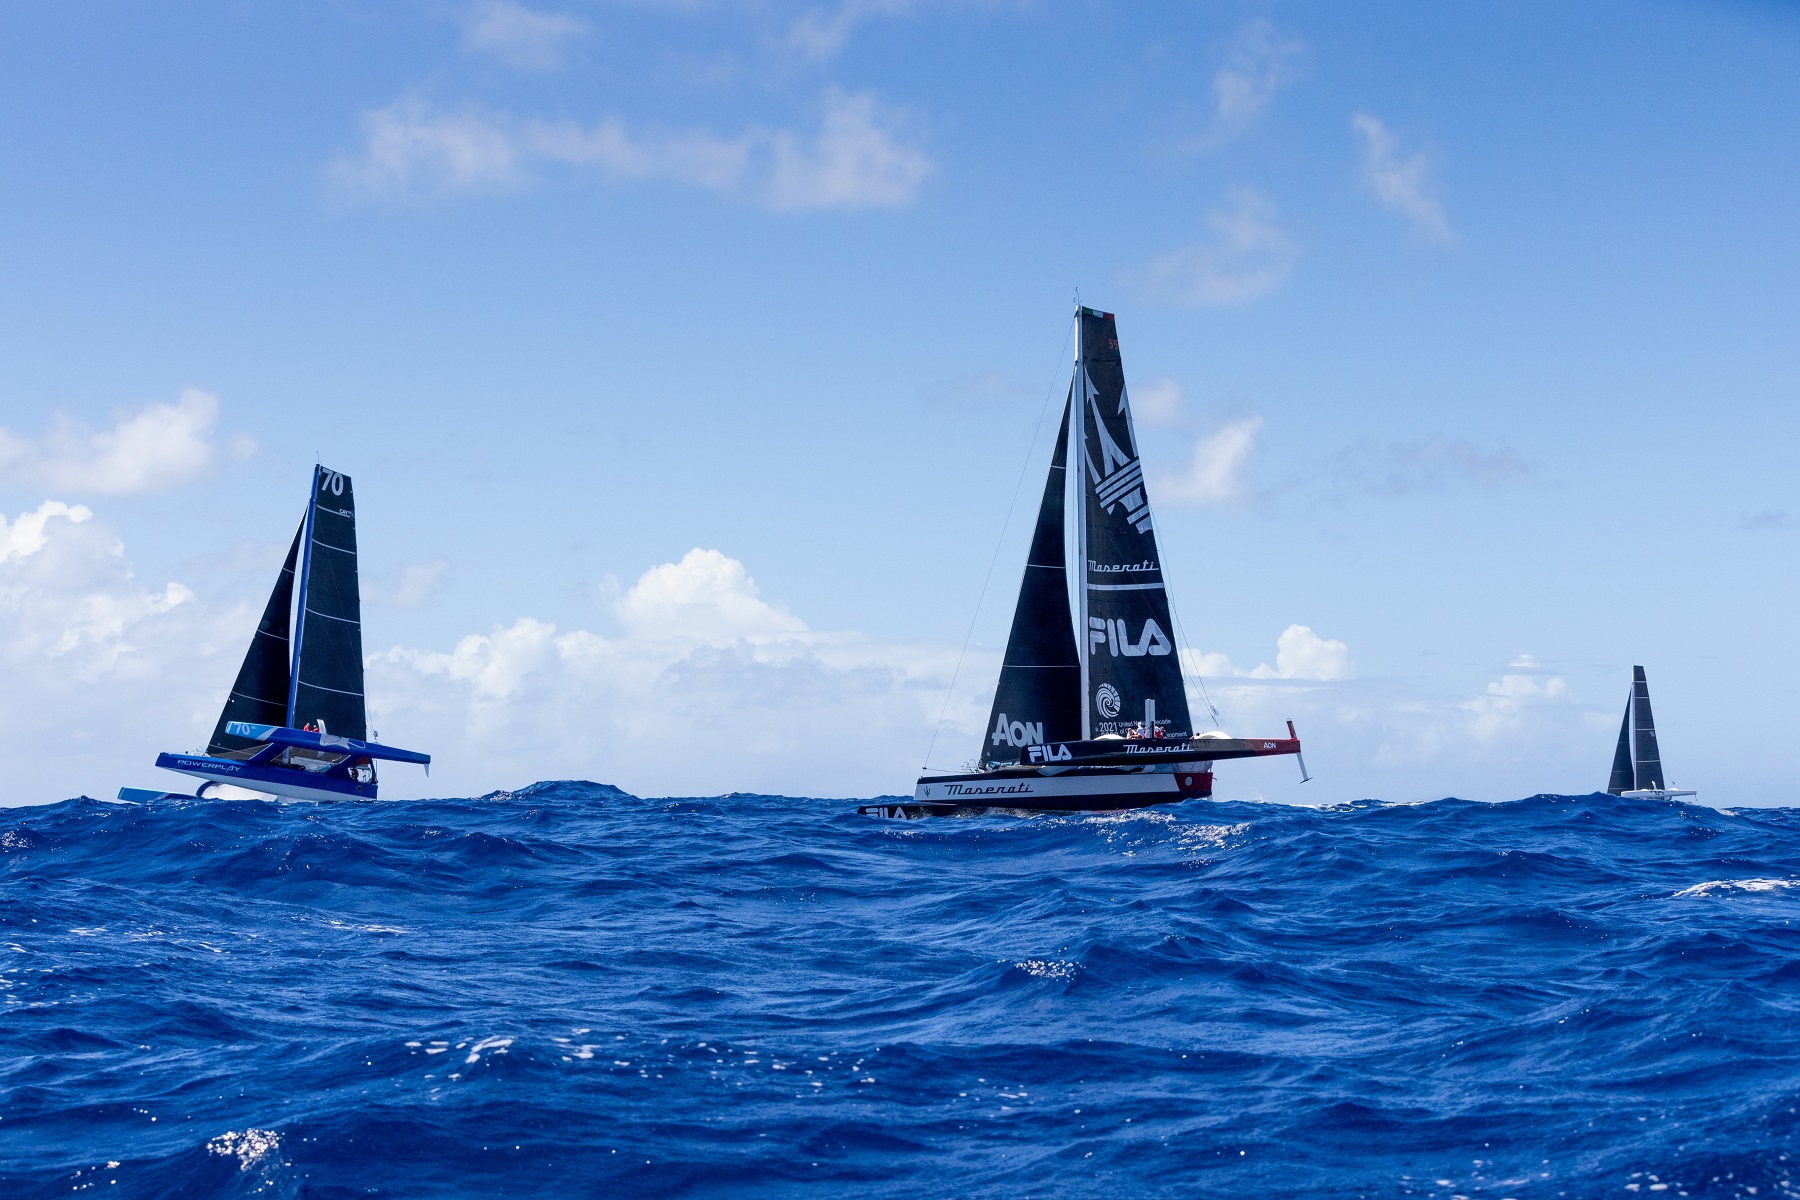 A battle is raging between the three foremost multihulls, with Giovanni Soldini’s Maserati (ITA) and Jason Carroll’s Argo (USA) less than a mile apart © Arthur Daniel/RORC